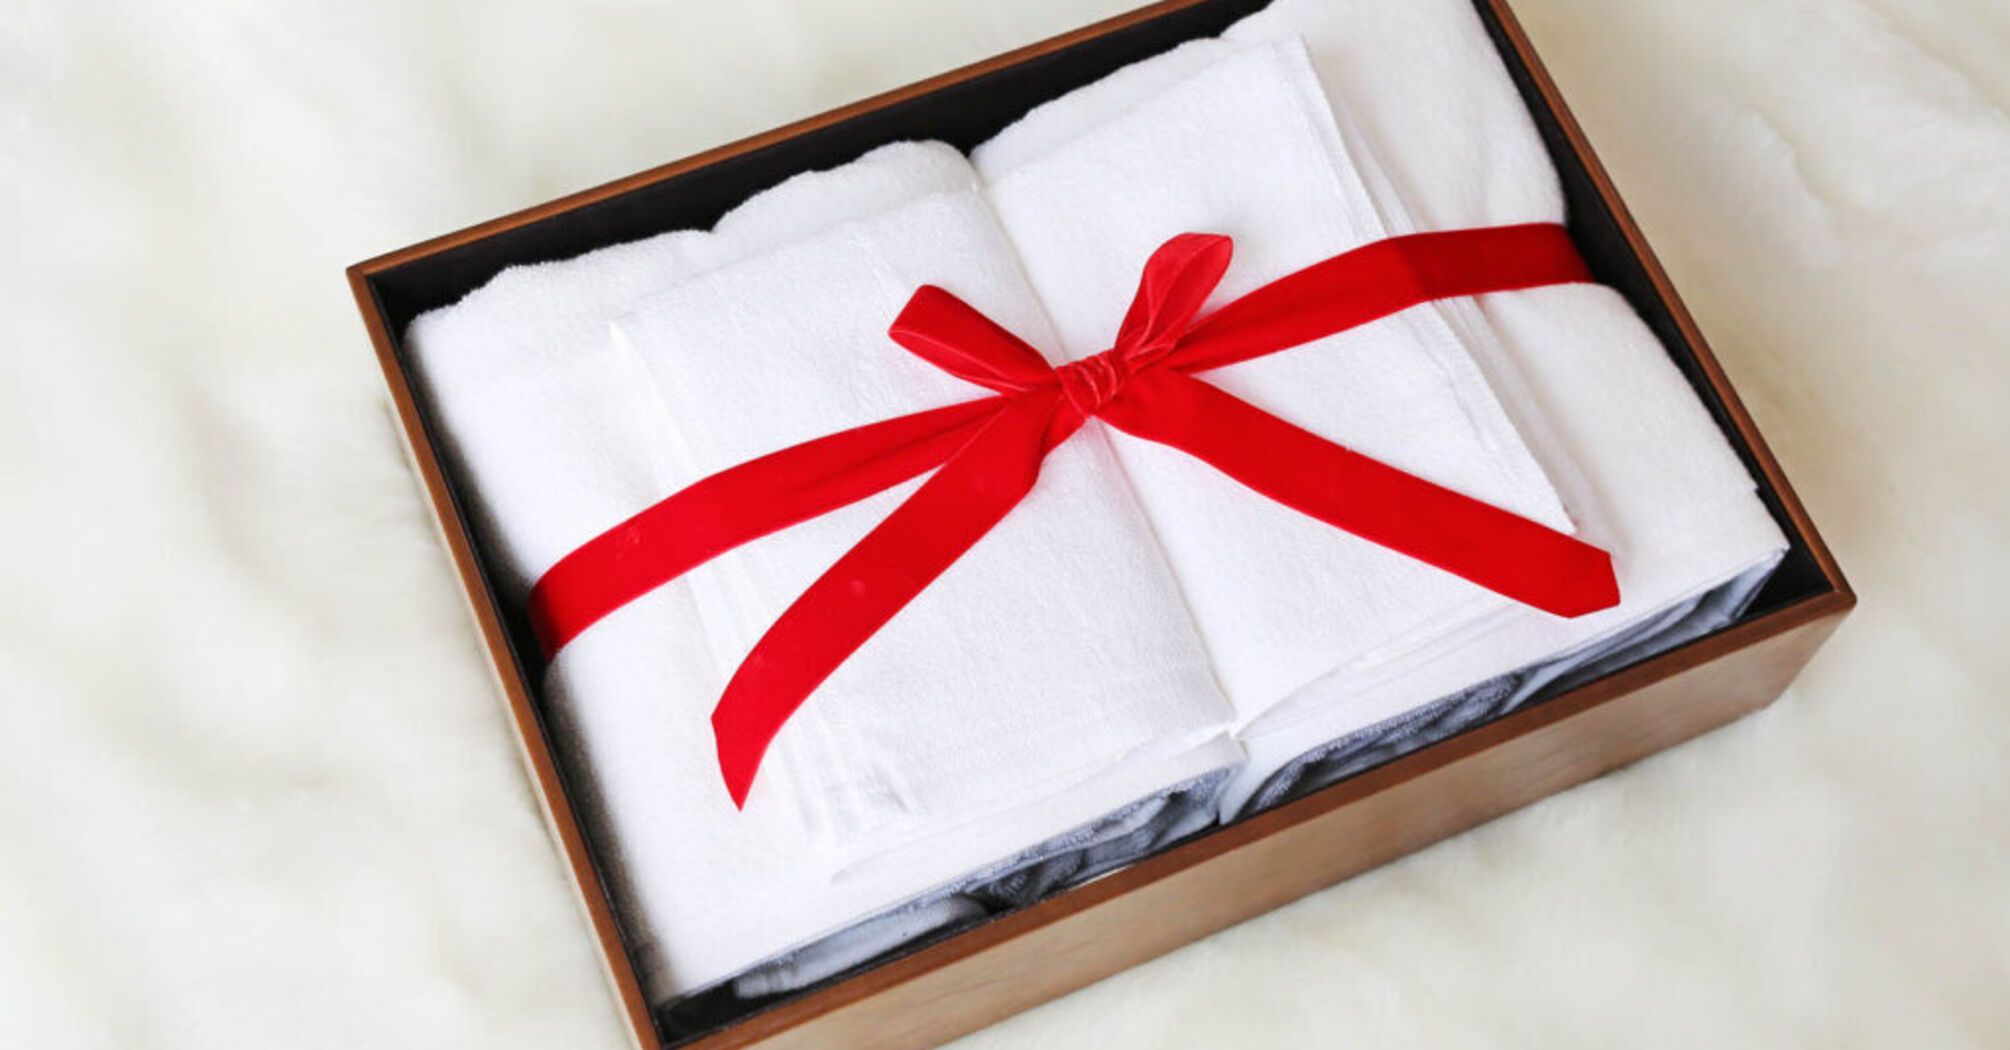 Towels as a gift